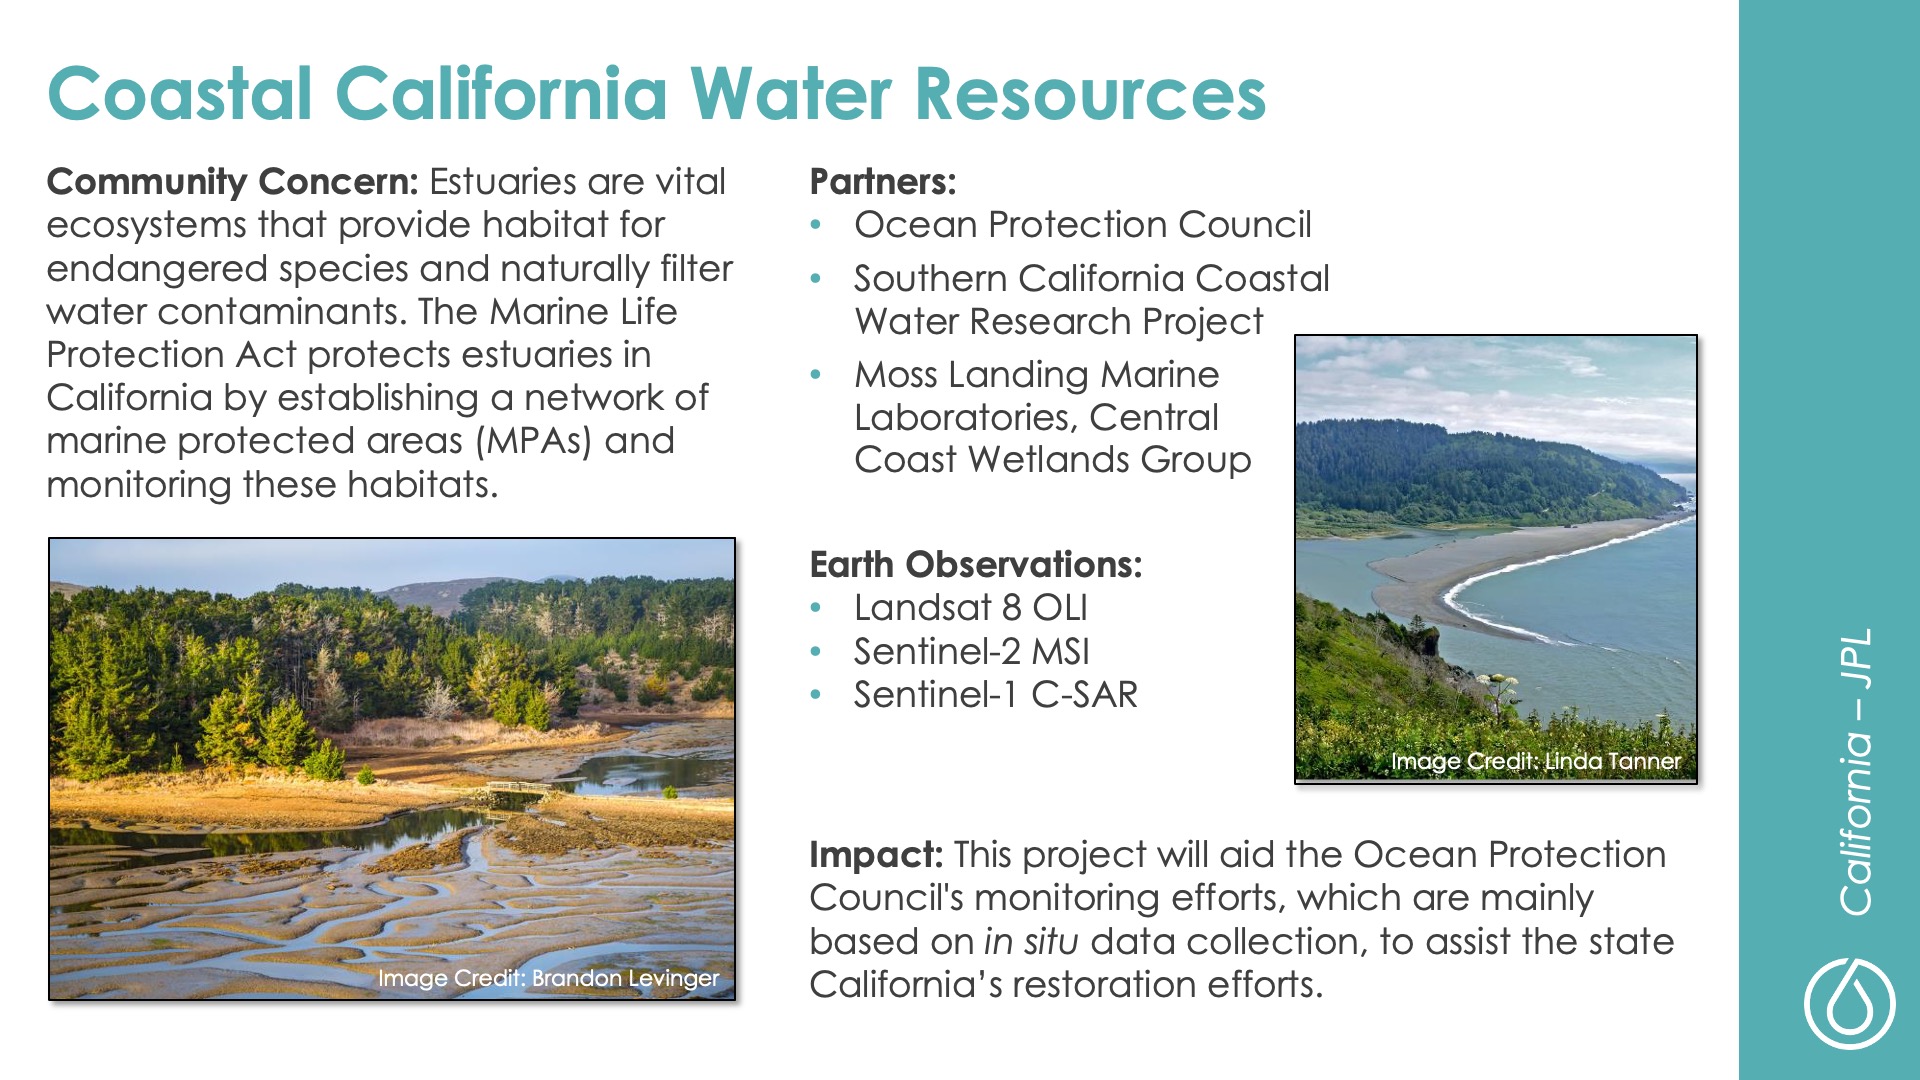 Slide title: Coastal California Water ResourcesDEVELOP Node: California - JPLCommunity Concern: Estuaries are vital ecosystems that provide habitat for endangered species and naturally filter water contaminants. The Marine Life Protection Act protects estuaries in California by establishing a network of marine protected areas (MPAs) and monitoring these habitats.Impact: This project will aid the Ocean Protection Council's monitoring efforts, which are mainly based on in situ data collection, to assist the state California’s restoration efforts.Partners: Ocean Protection Council, Southern California Coastal Water Research Project, Moss Landing Marine Laboratories, Central Coast Wetlands GroupEarth Observations: Landsat 8 OLI, Sentinel-2 MSI, Sentinel-1 C-SAR